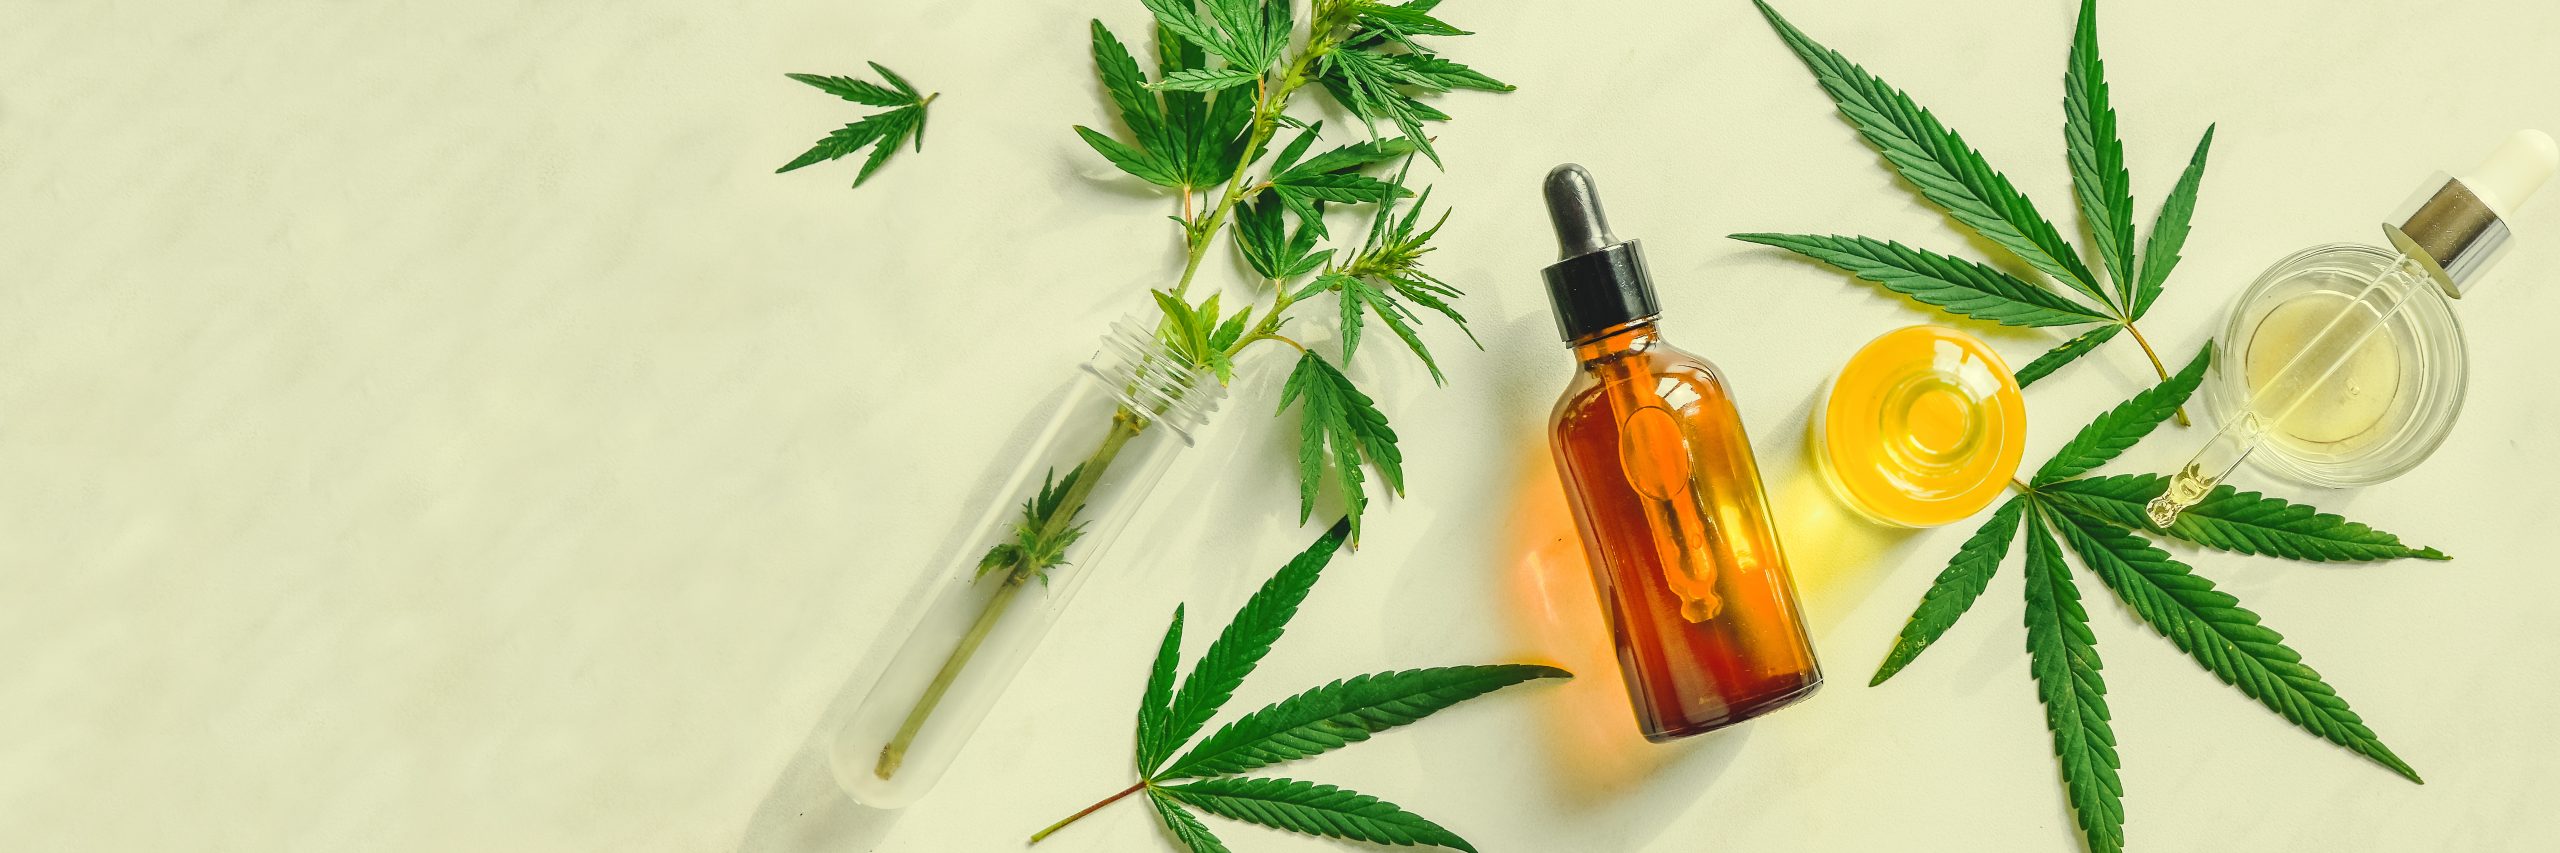 Access to Reliable Information about CBD Law